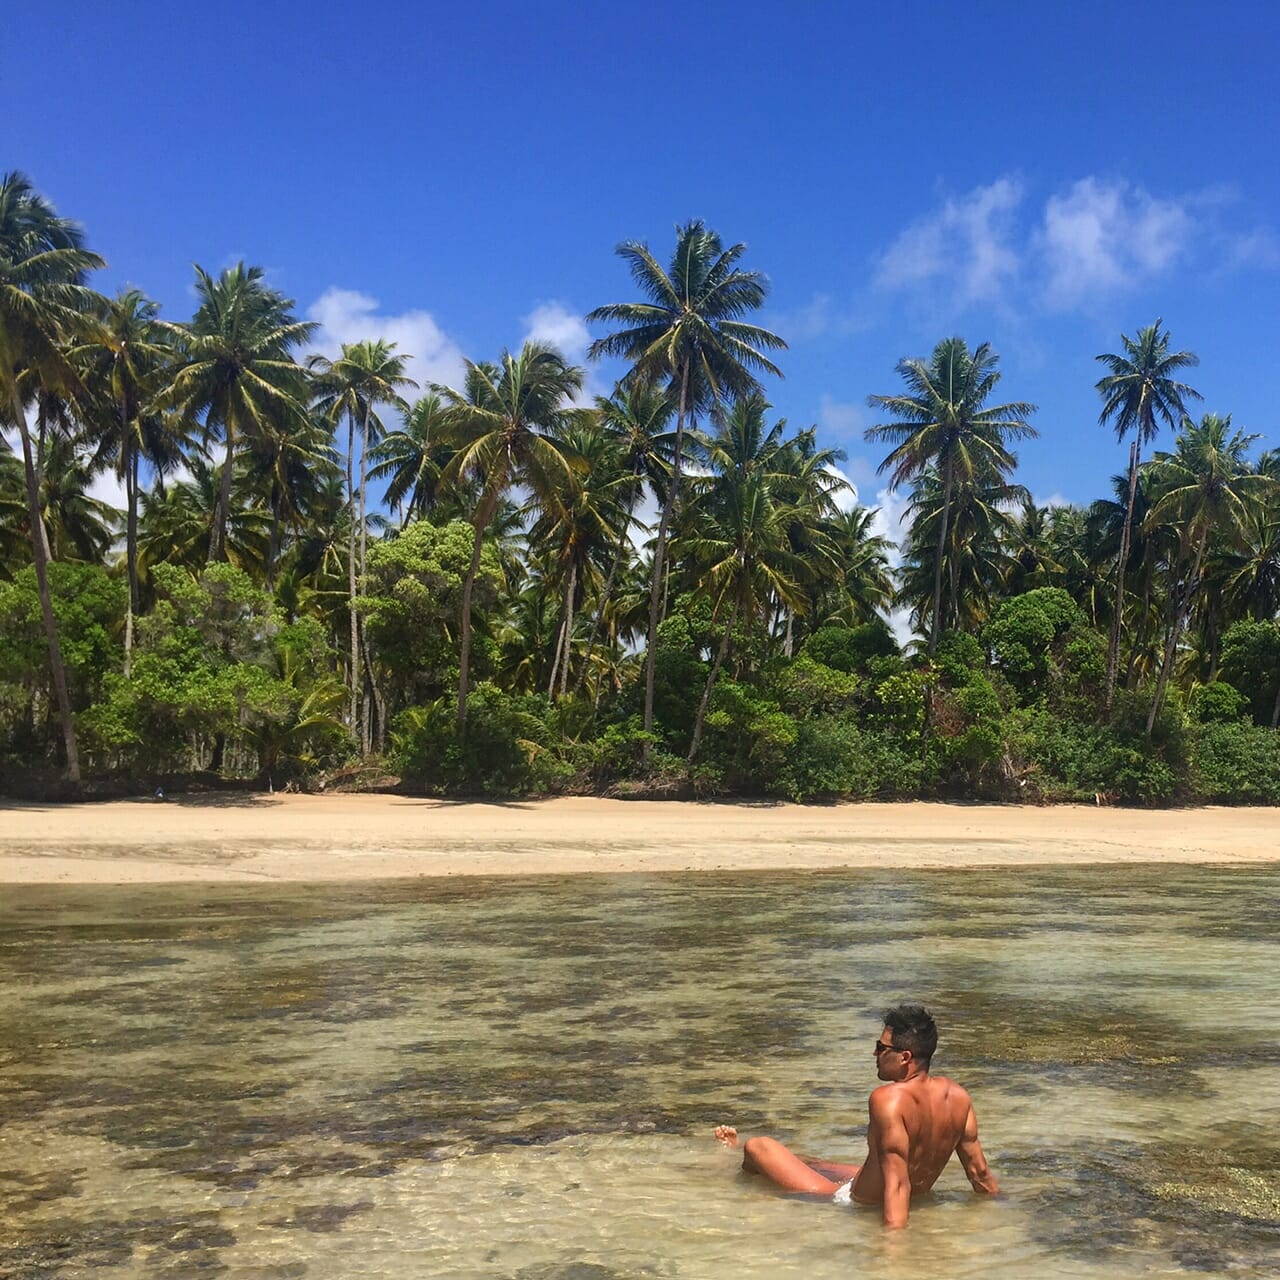 Pericles Rosa sitting on the shallow waters of Moreré Beach on Boipeba Island, with some trees in the backdrop, Bahia, Brazil